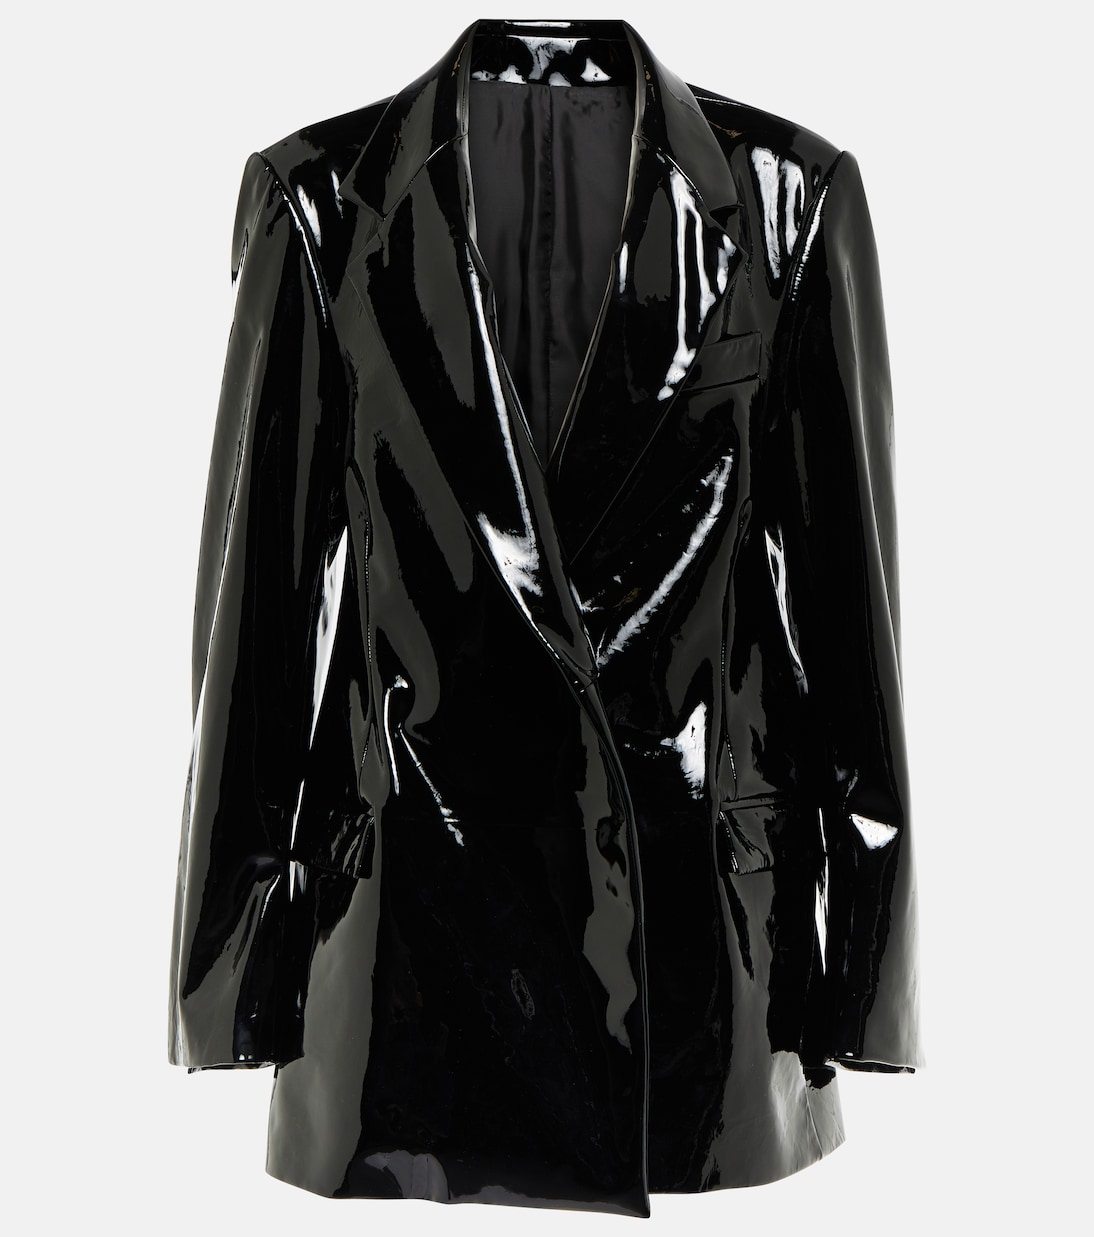 A black shiny coat on a swinger Description automatically generated